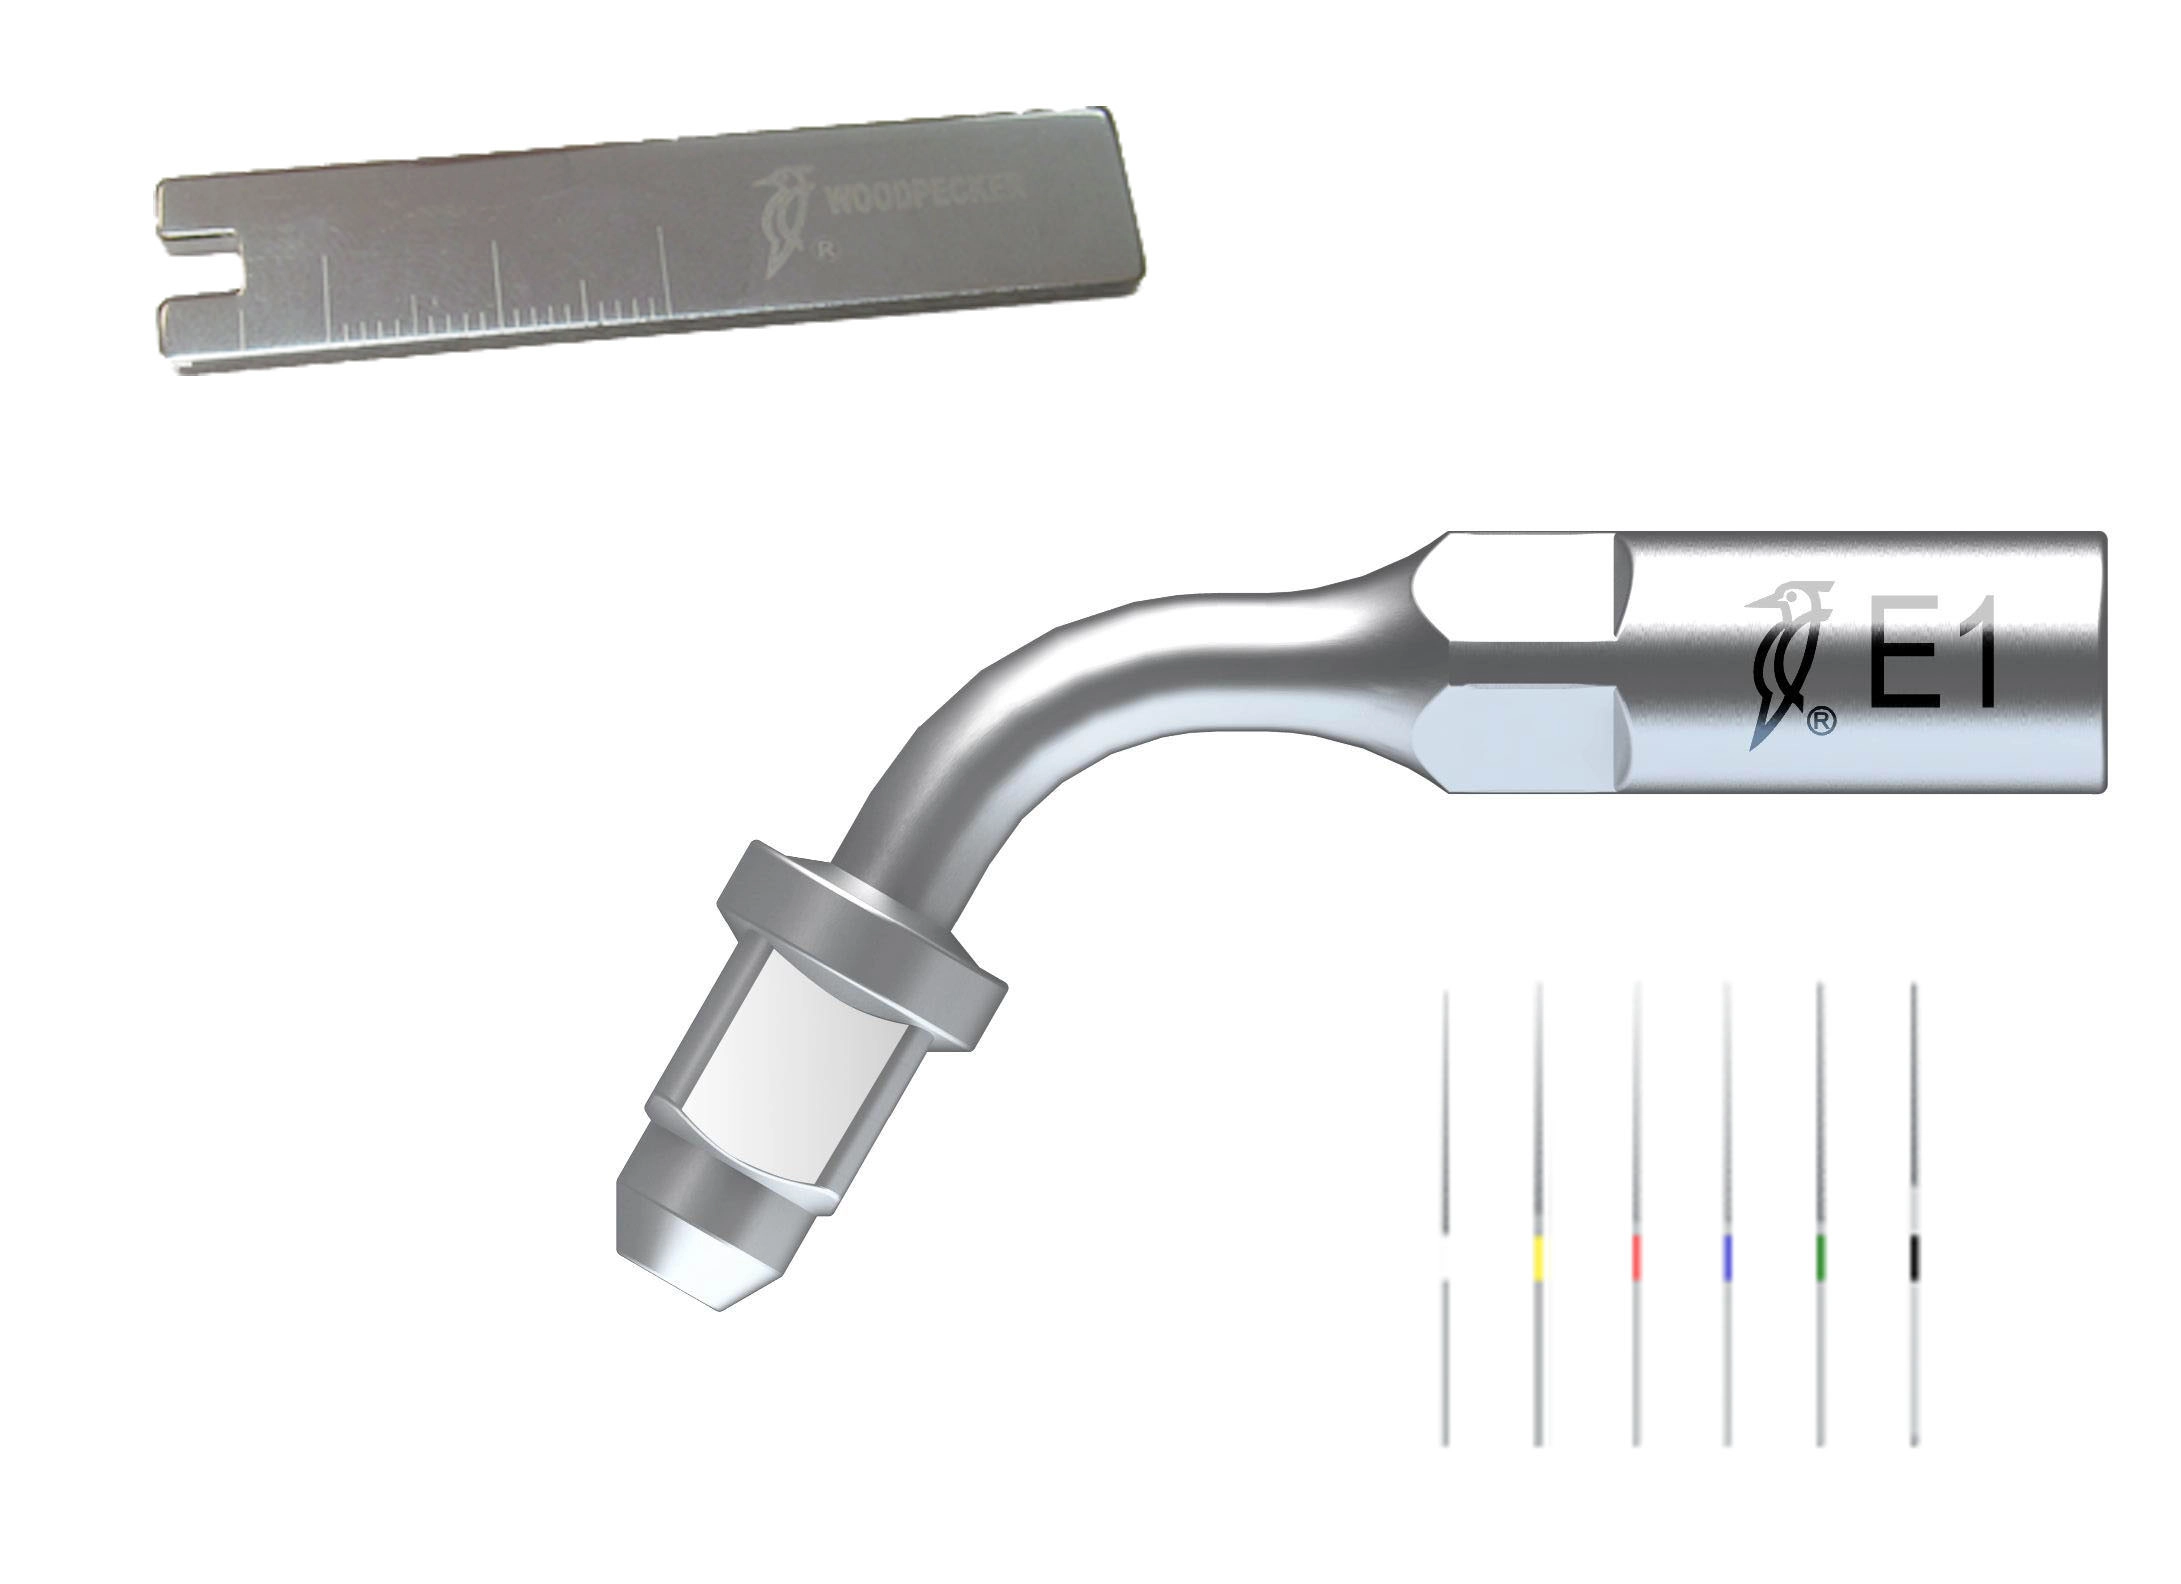 Endodontic Set for Ultrasonic Scaler Tip: with several heads, NiTi files and wrench (EMS, Satelec, Sirona) - (available only in Hungary)